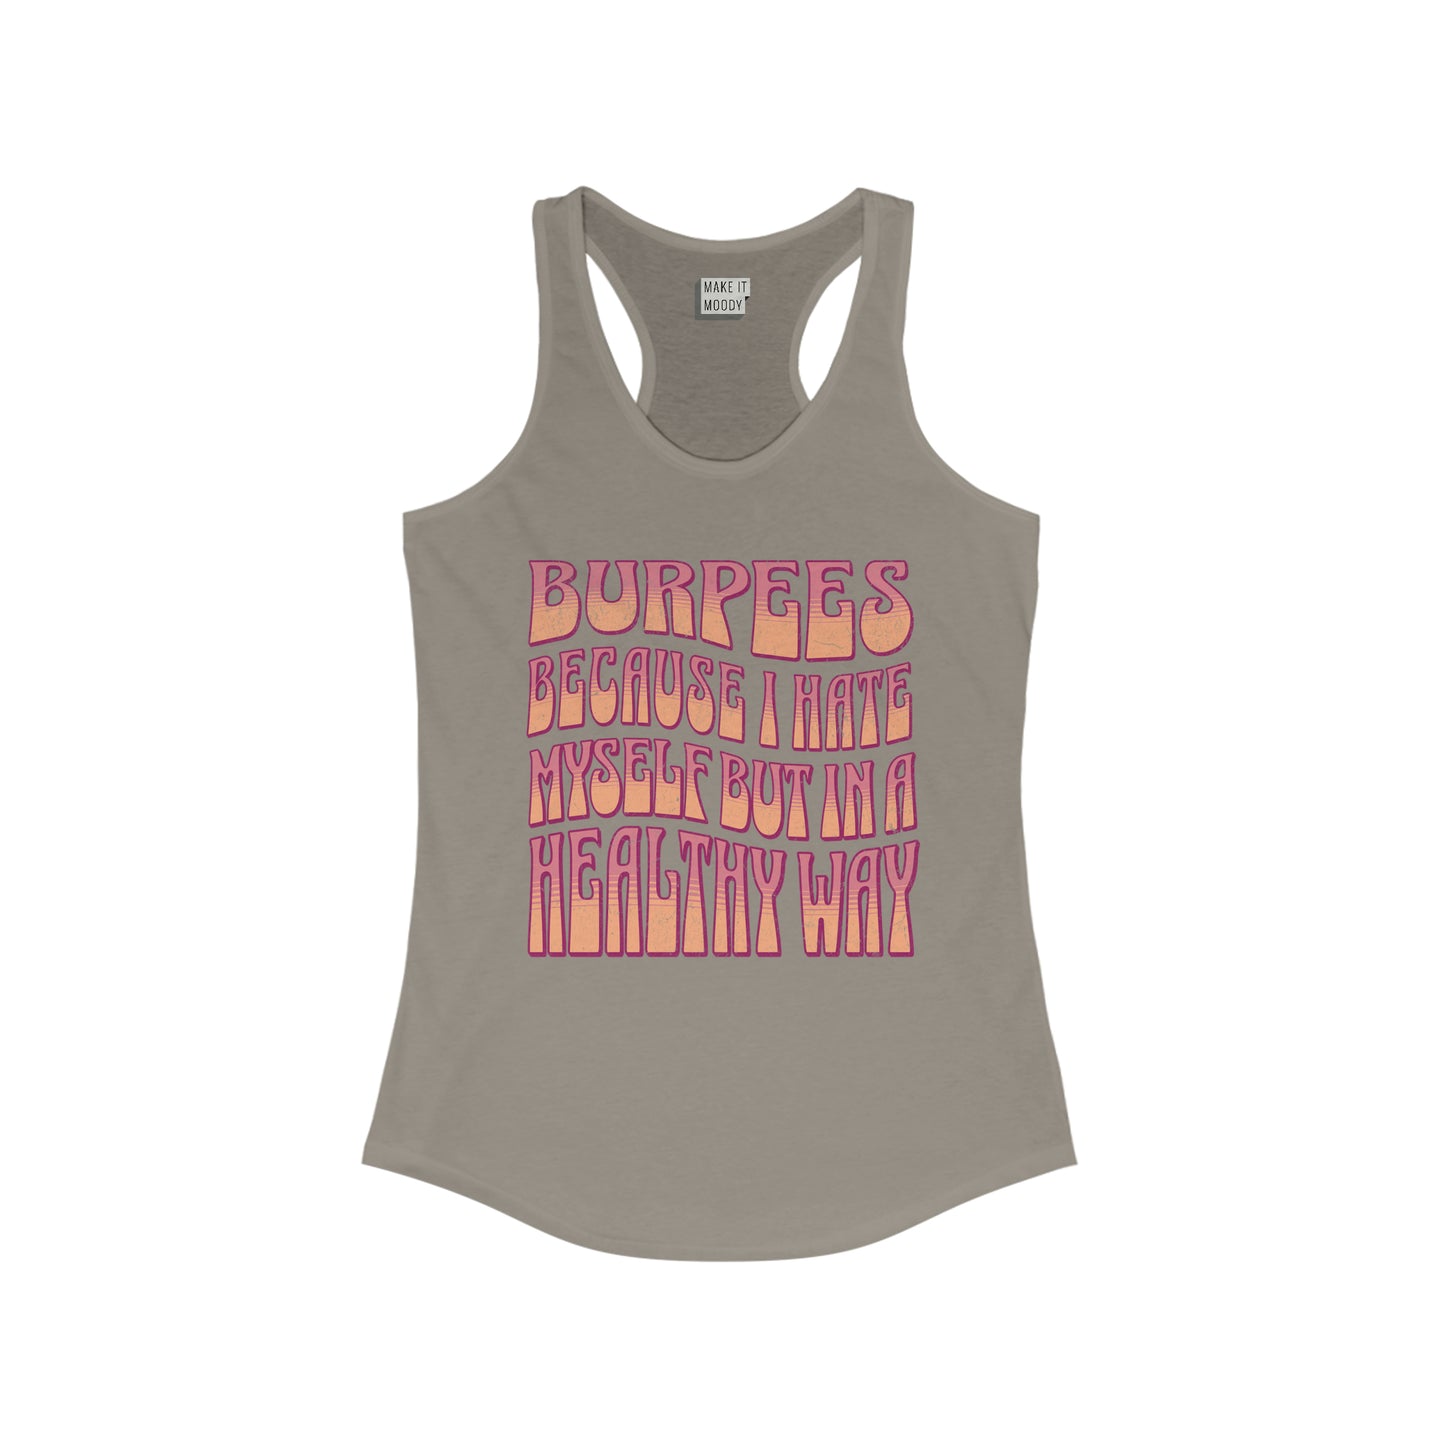 "Burpees, Because I Hate Myself But In A Healthy Way" Gym Tank